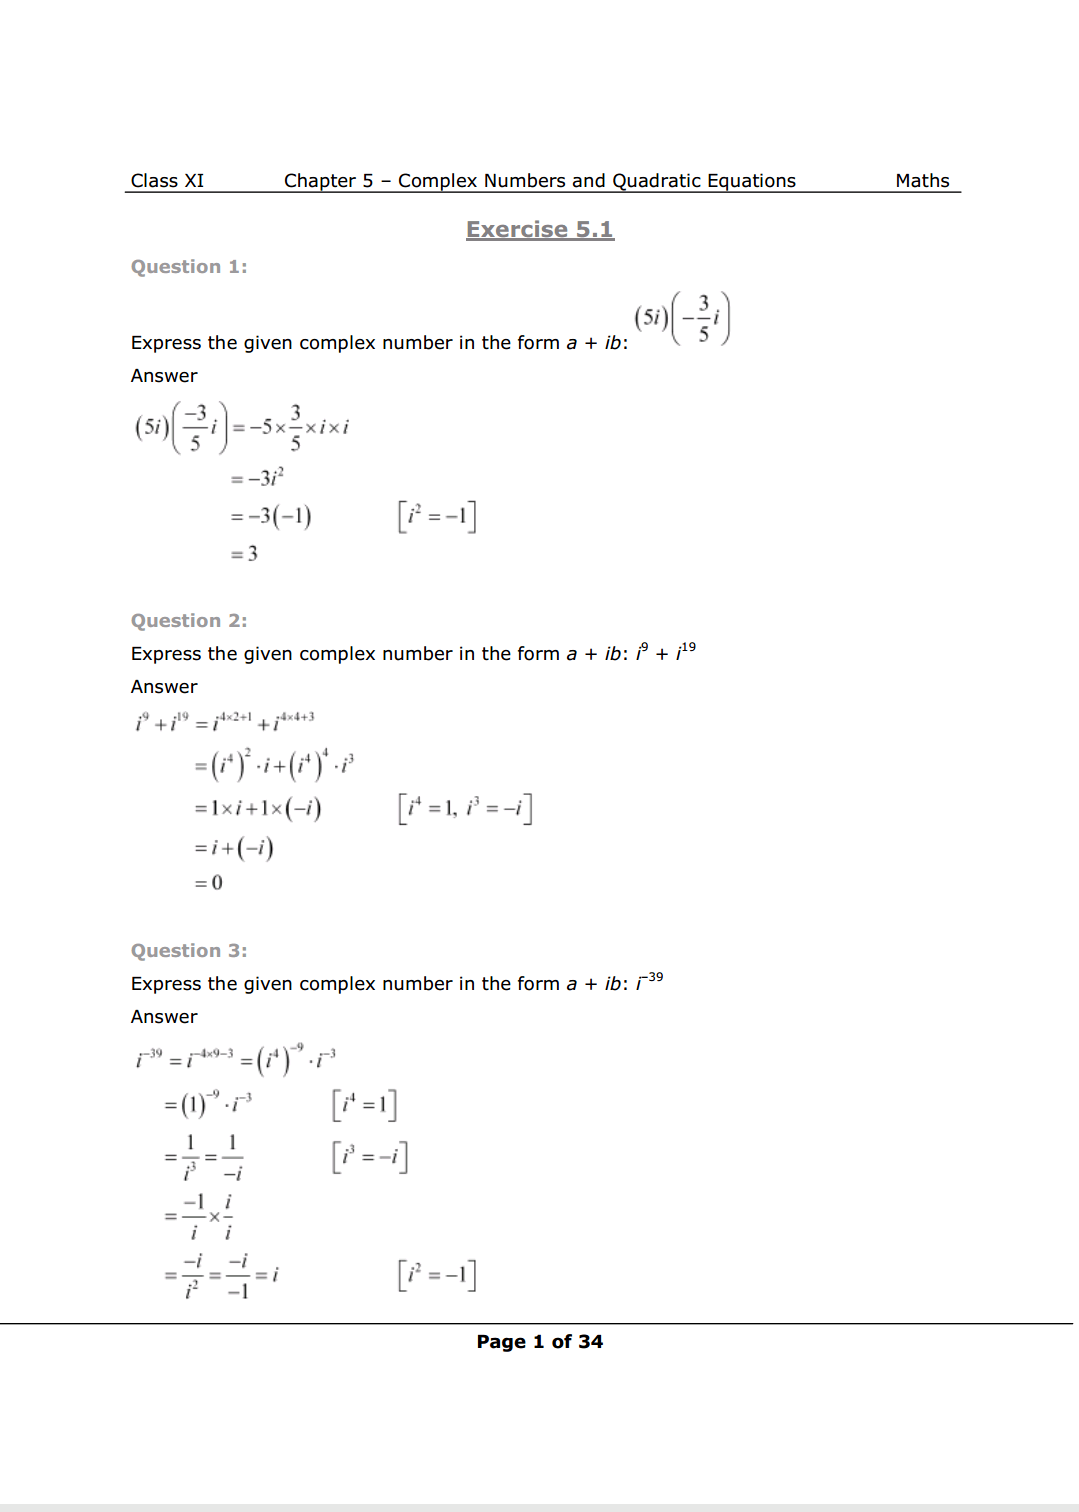 Class 11 math chapter 5 exercise 5.1 Solutions Image 1